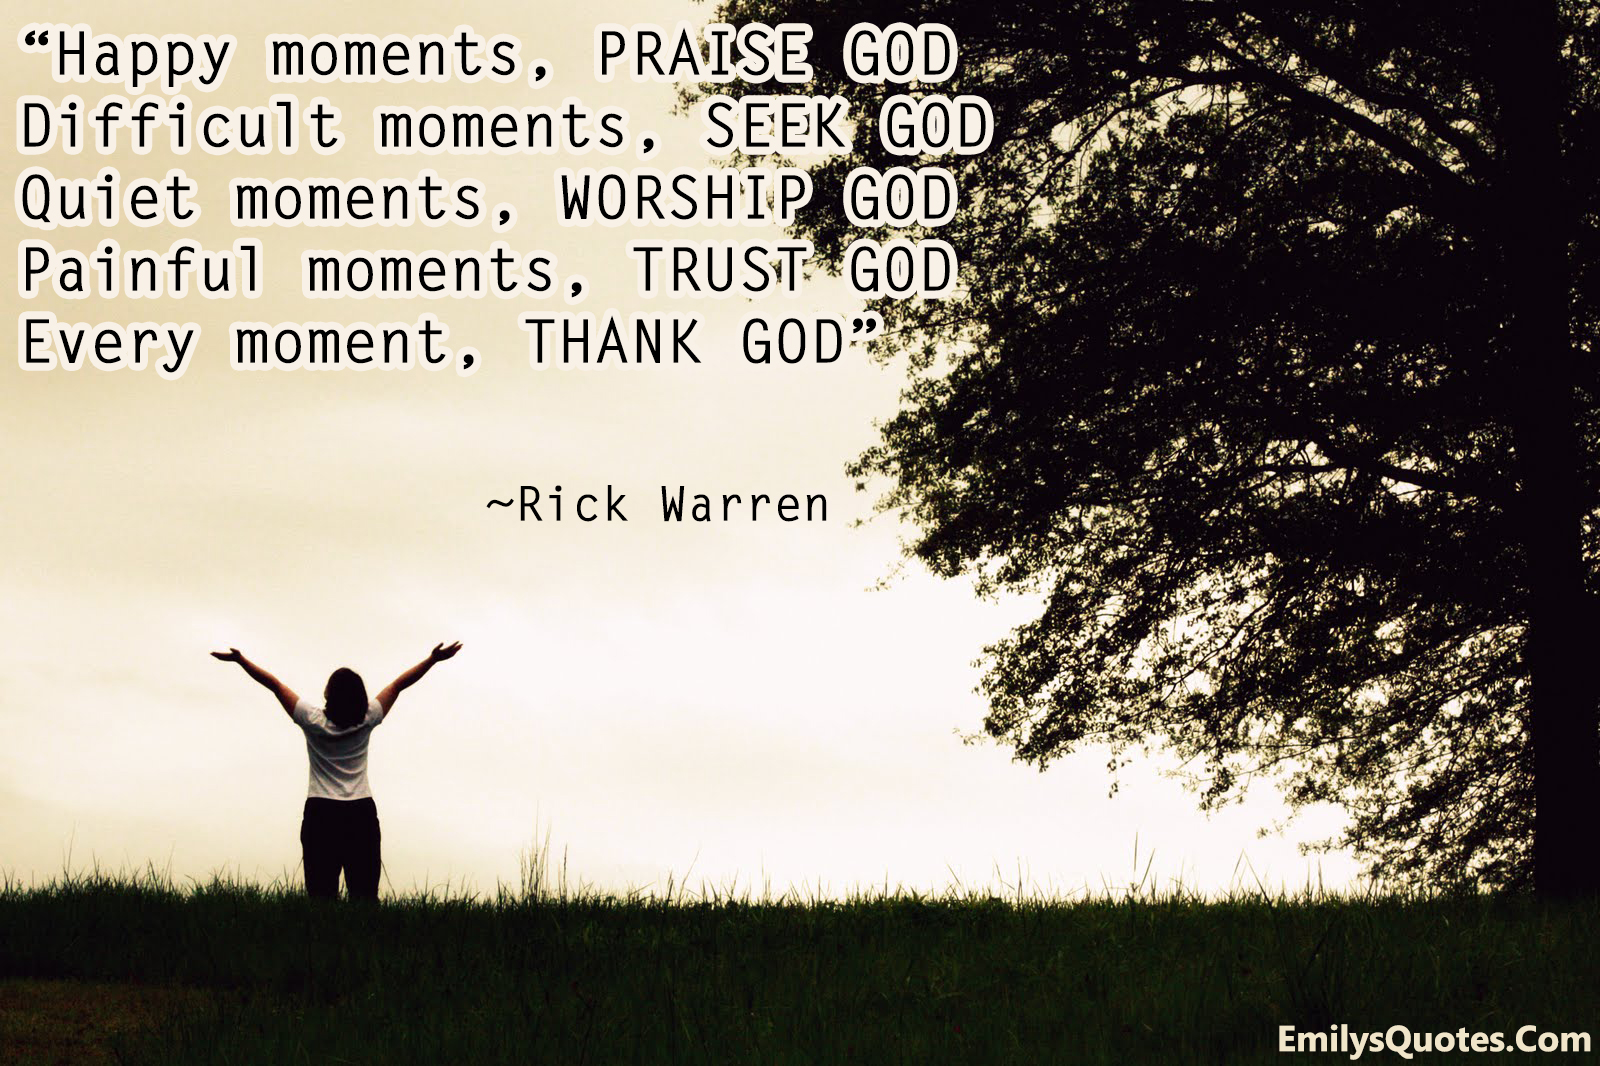 Happy moments, PRAISE GOD  Difficult moments, SEEK GOD  Quiet moments, WORSHIP GOD  Painful moments, TRUST GOD  Every moment, THANK GOD